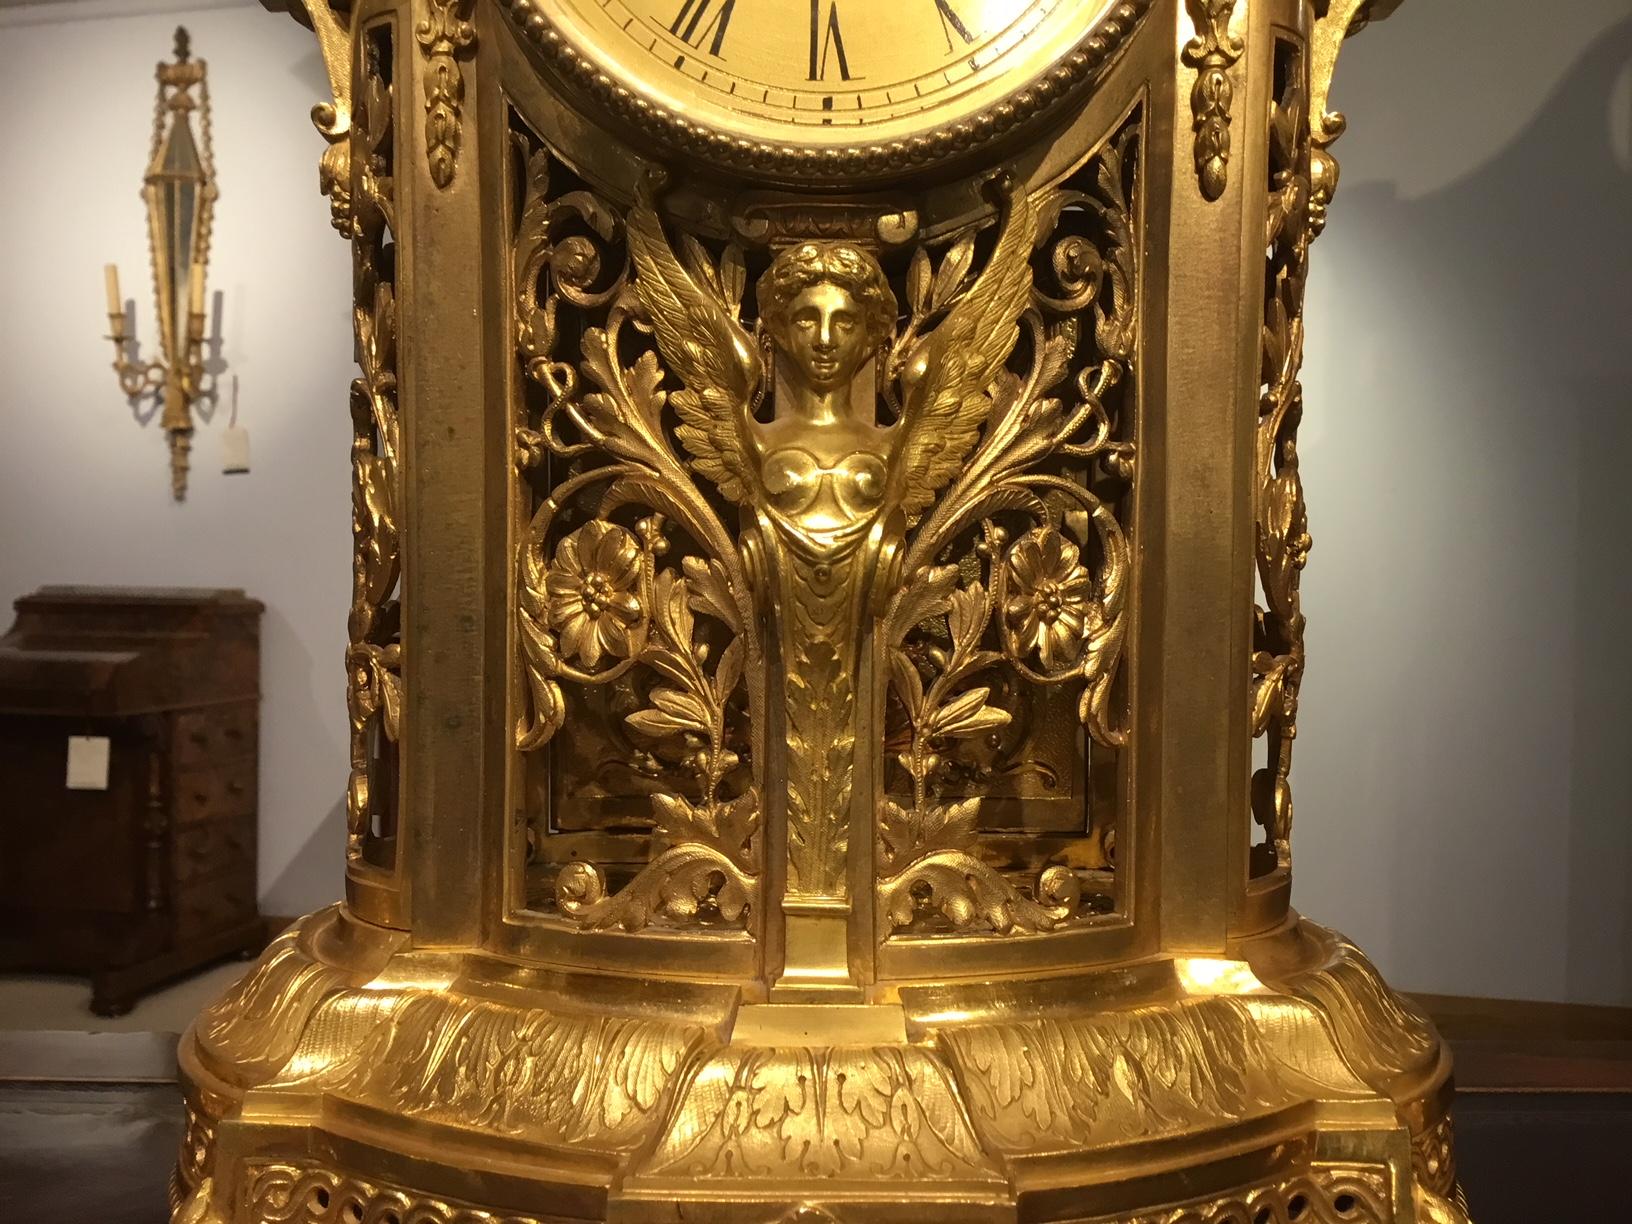 A beautiful late 19th century French ormolu clock garniture with a Japy Freres movement. The central clock having a circular dial with Roman numerals, striking on the quarter, half and hour, above a winged angel, with a pierced case having acanthus